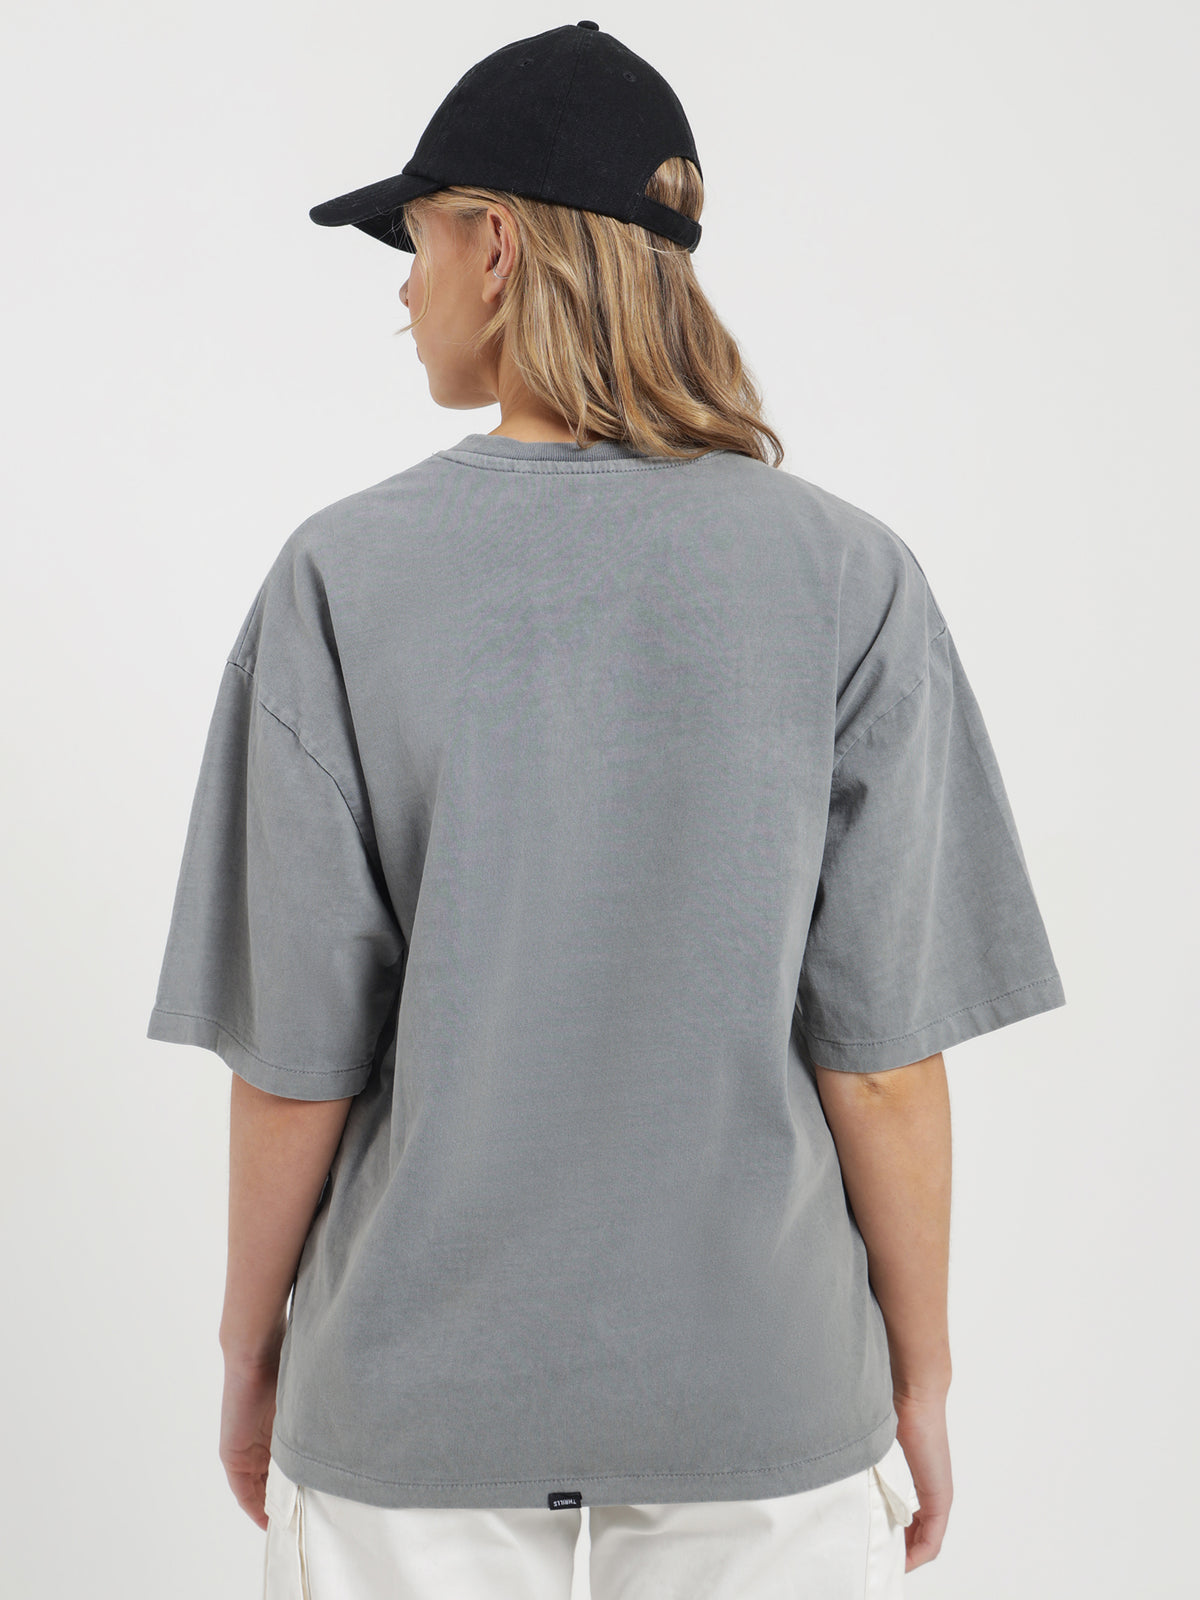 State of Being T-Shirt in Washed Grey